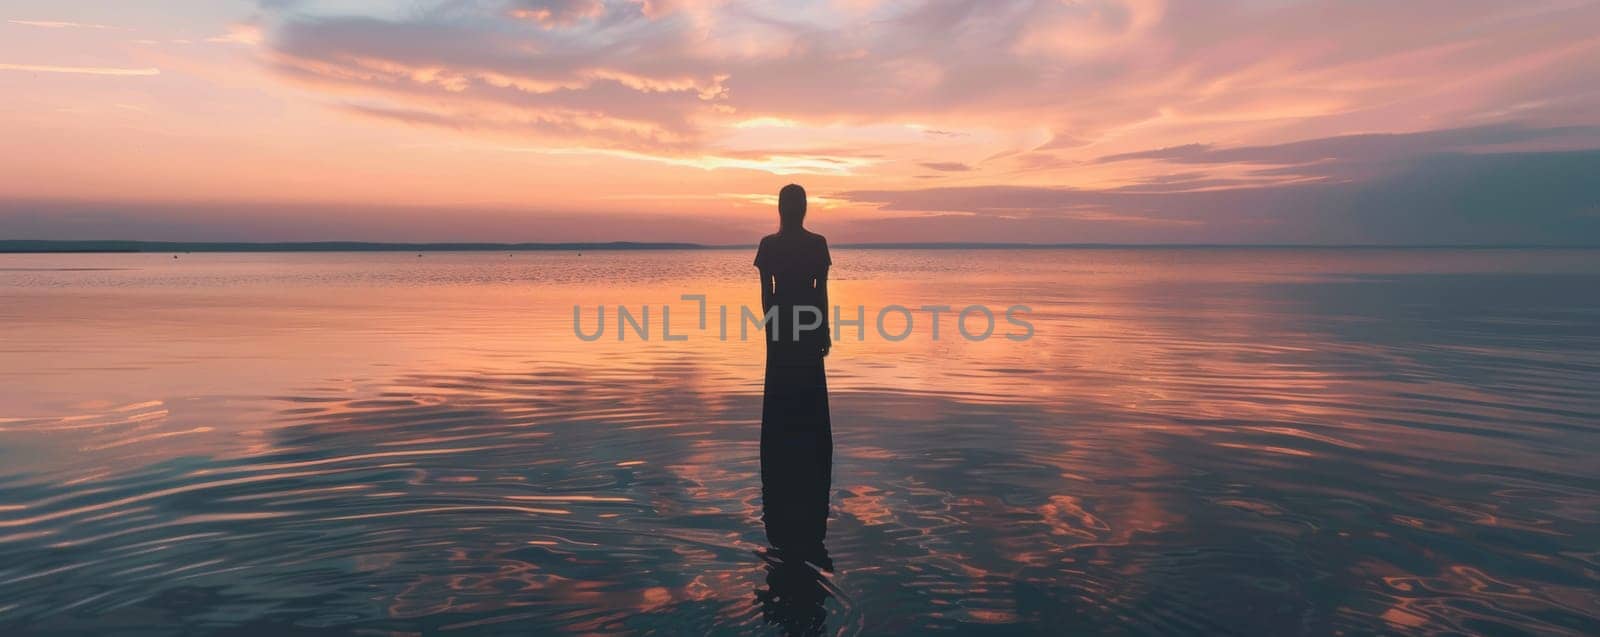 Silhouette of a woman standing in the sea at sunset by Anastasiia